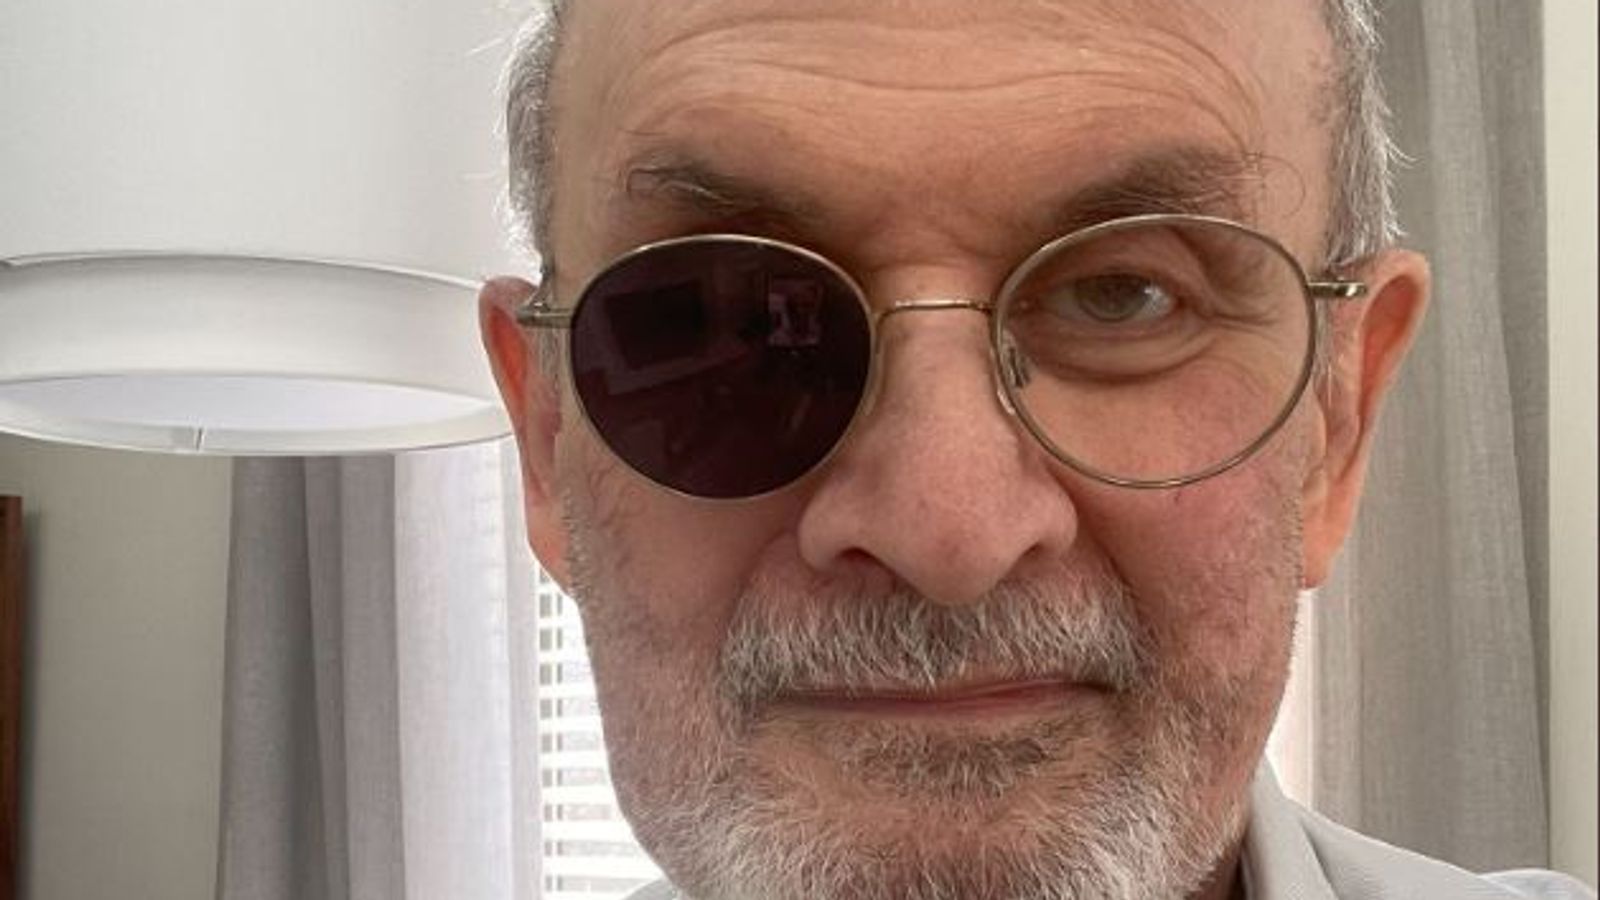 'I'm lucky and grateful': Salman Rushdie shares picture of himself after first interview since brutal attack